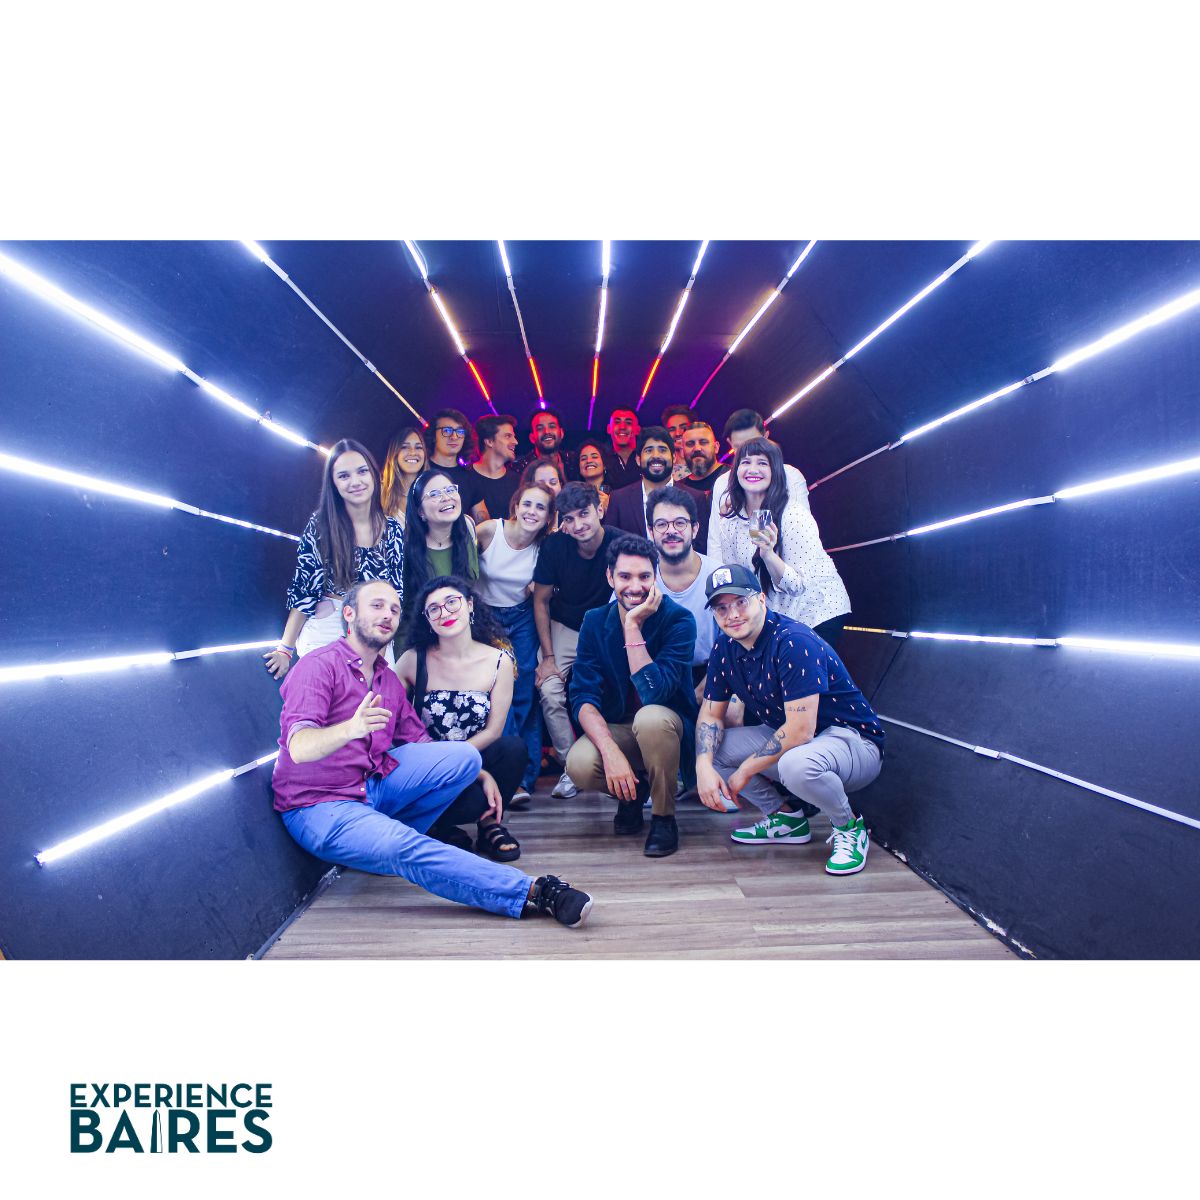 You are currently viewing Tourism Season Event by Experience Baires